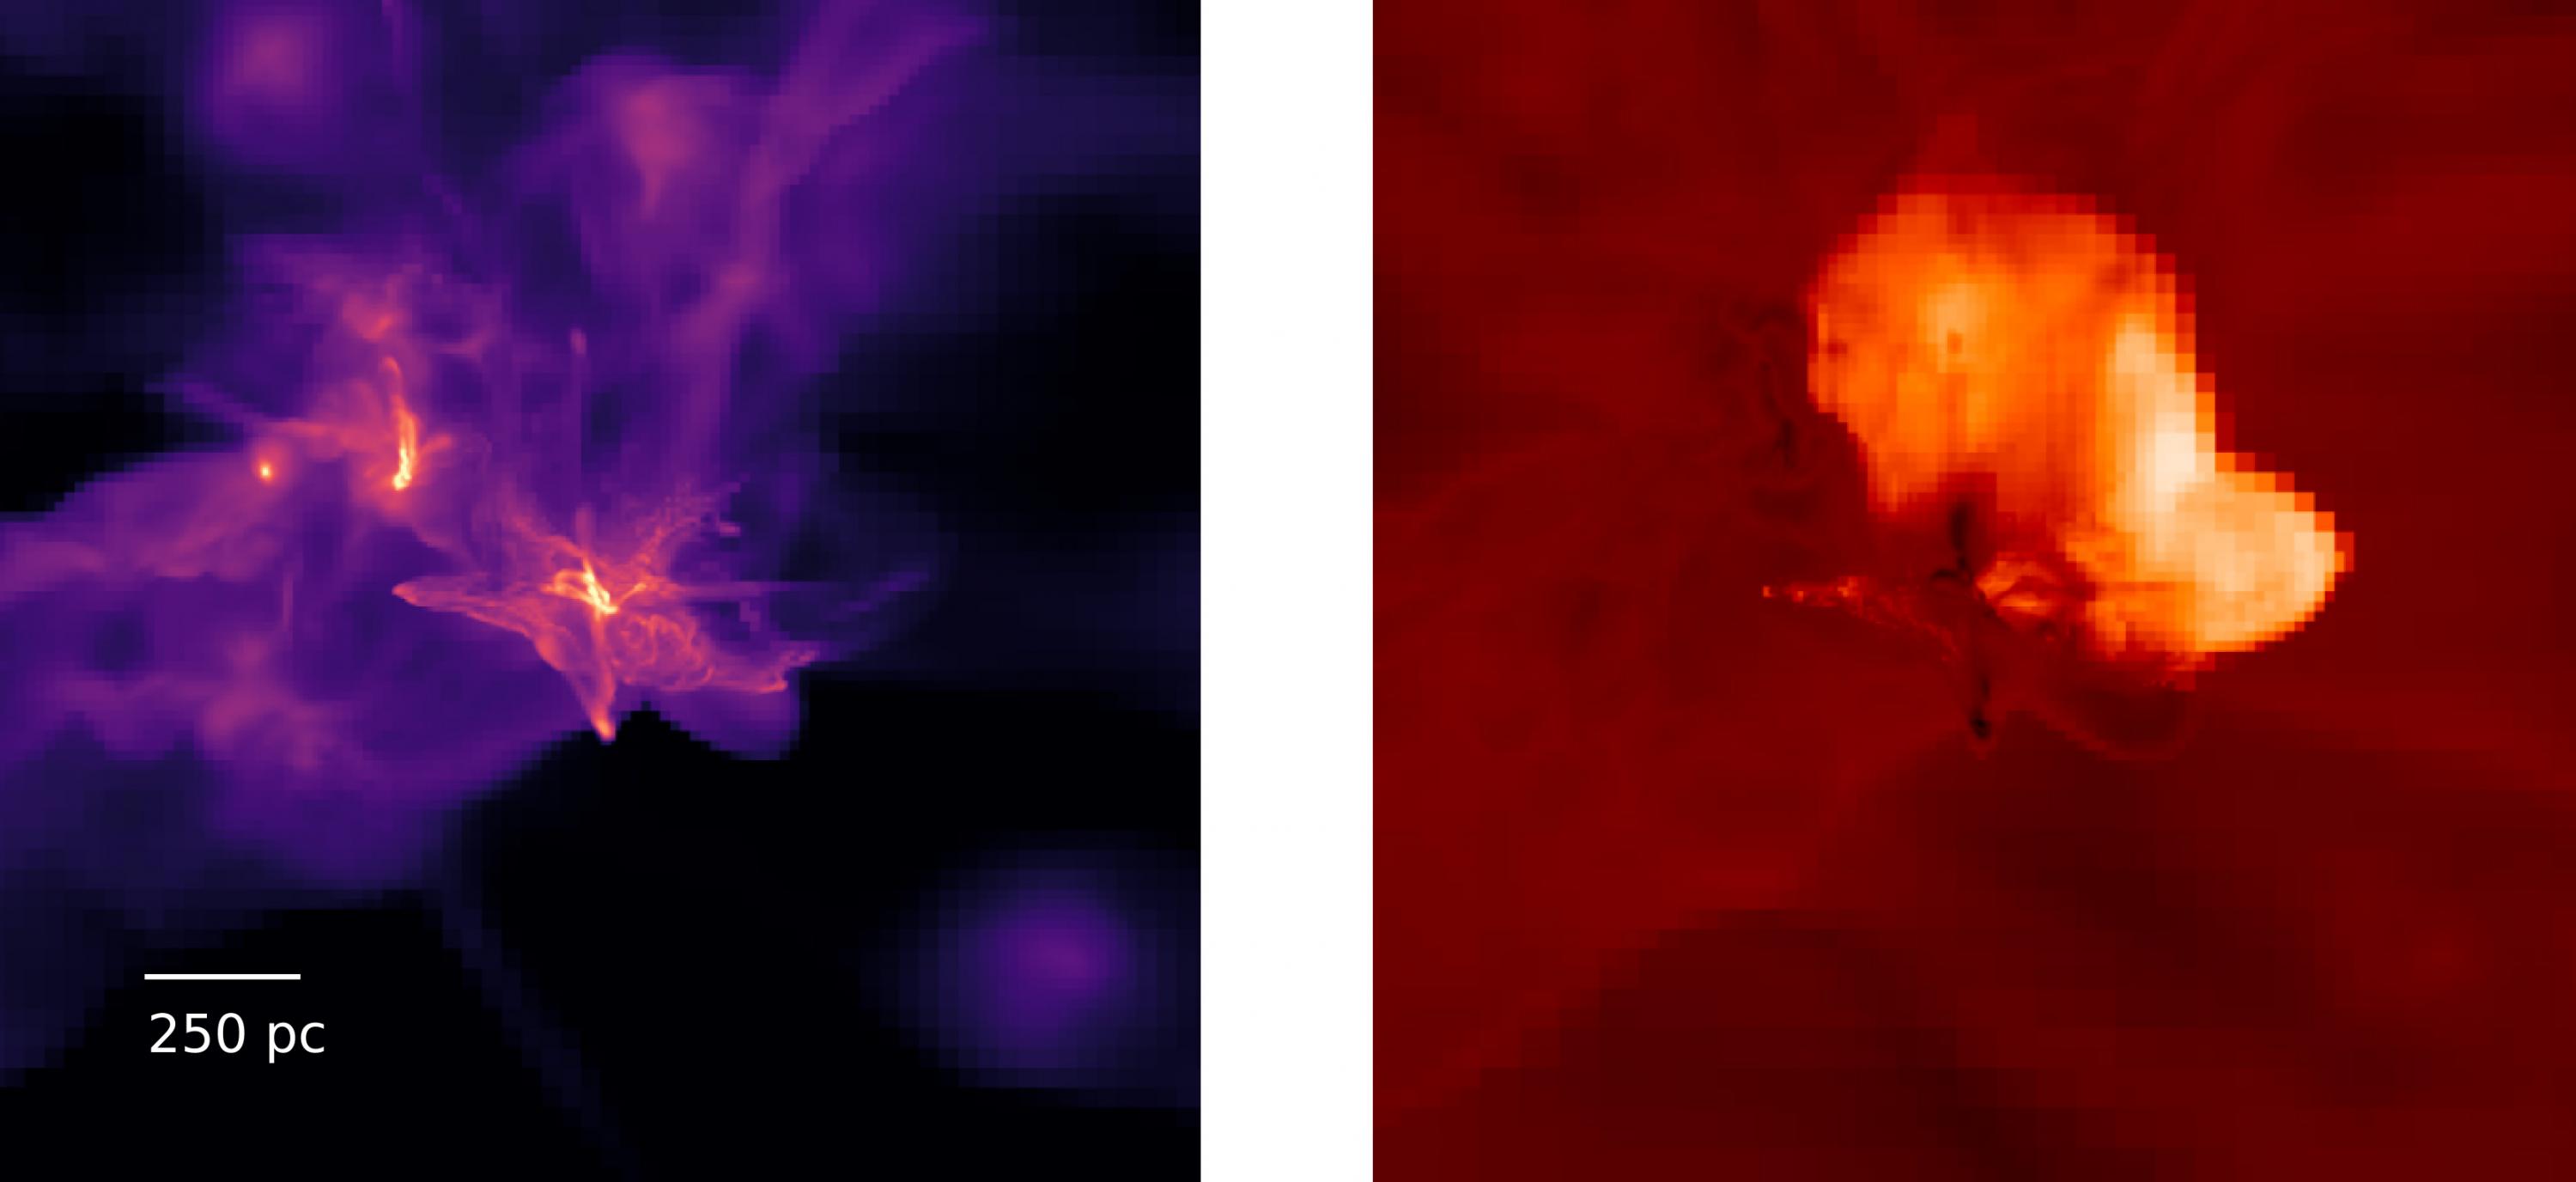 Simulation of direct collapse black hole